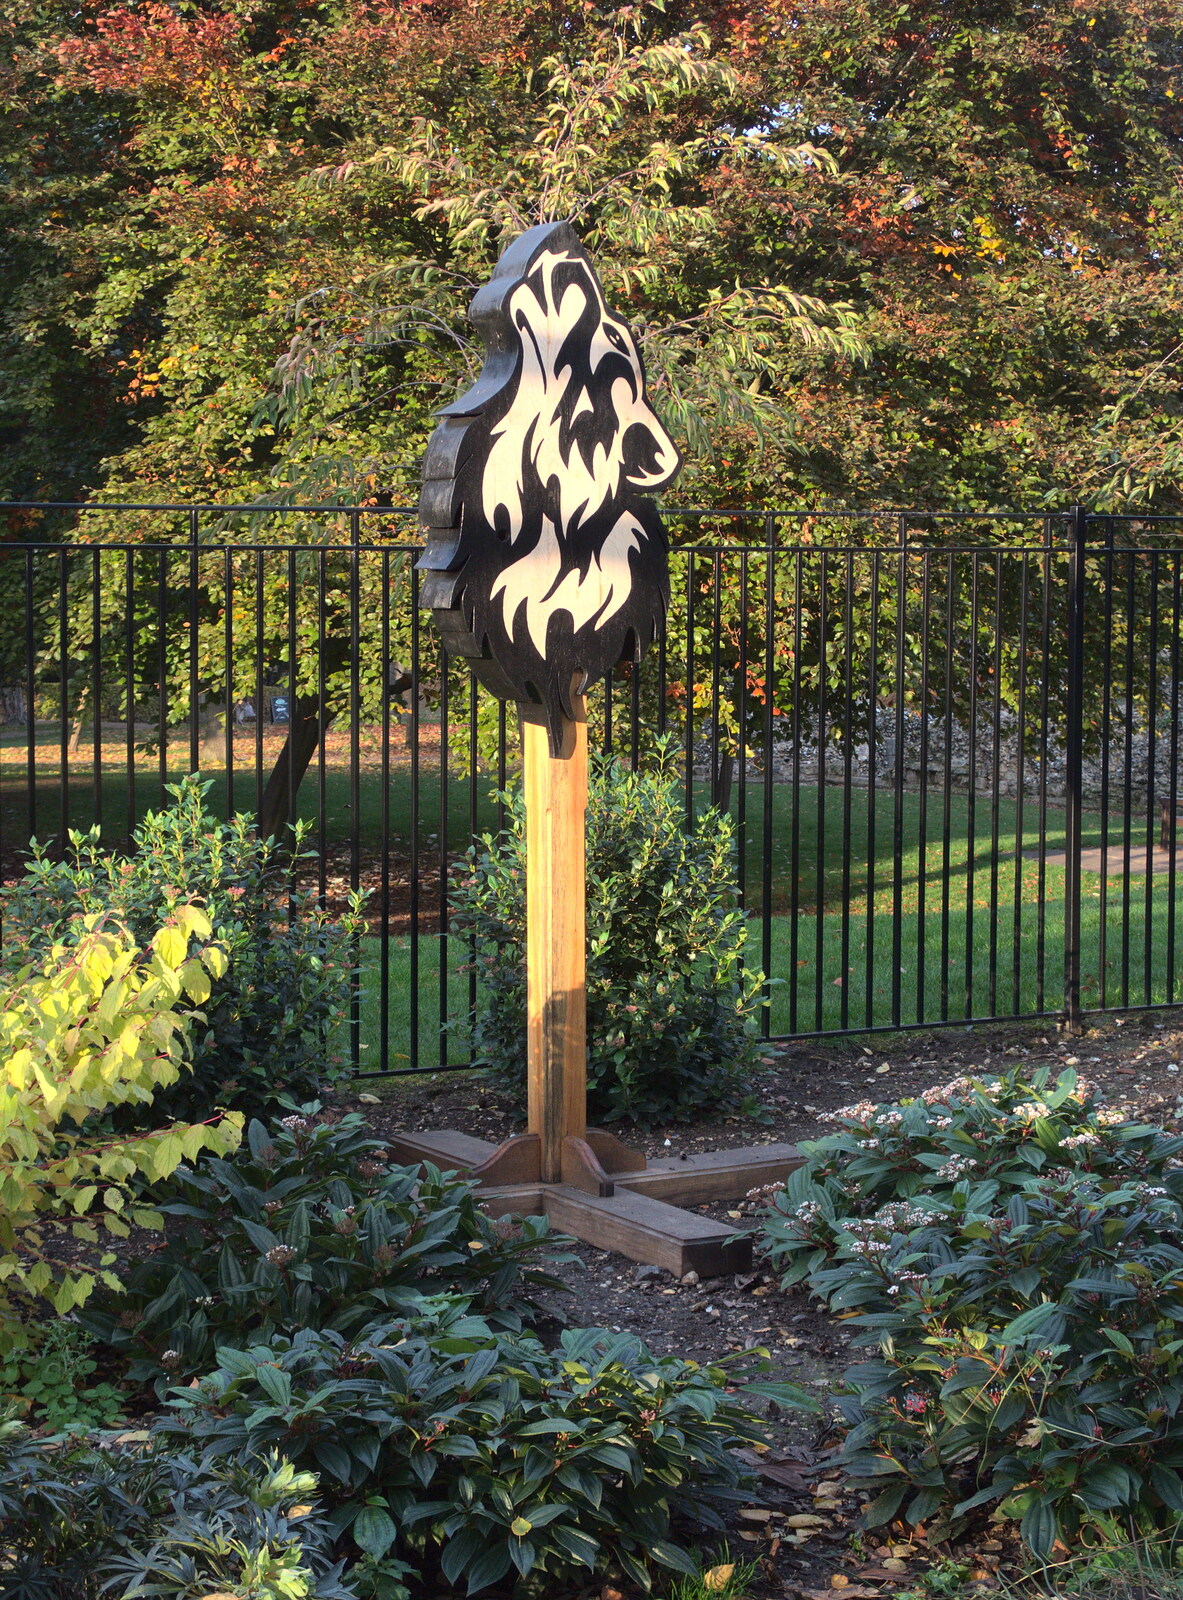 A wolf on a stick from Abbey Gardens in Autumn, Bury St. Edmunds, Suffolk - 27th October 2015